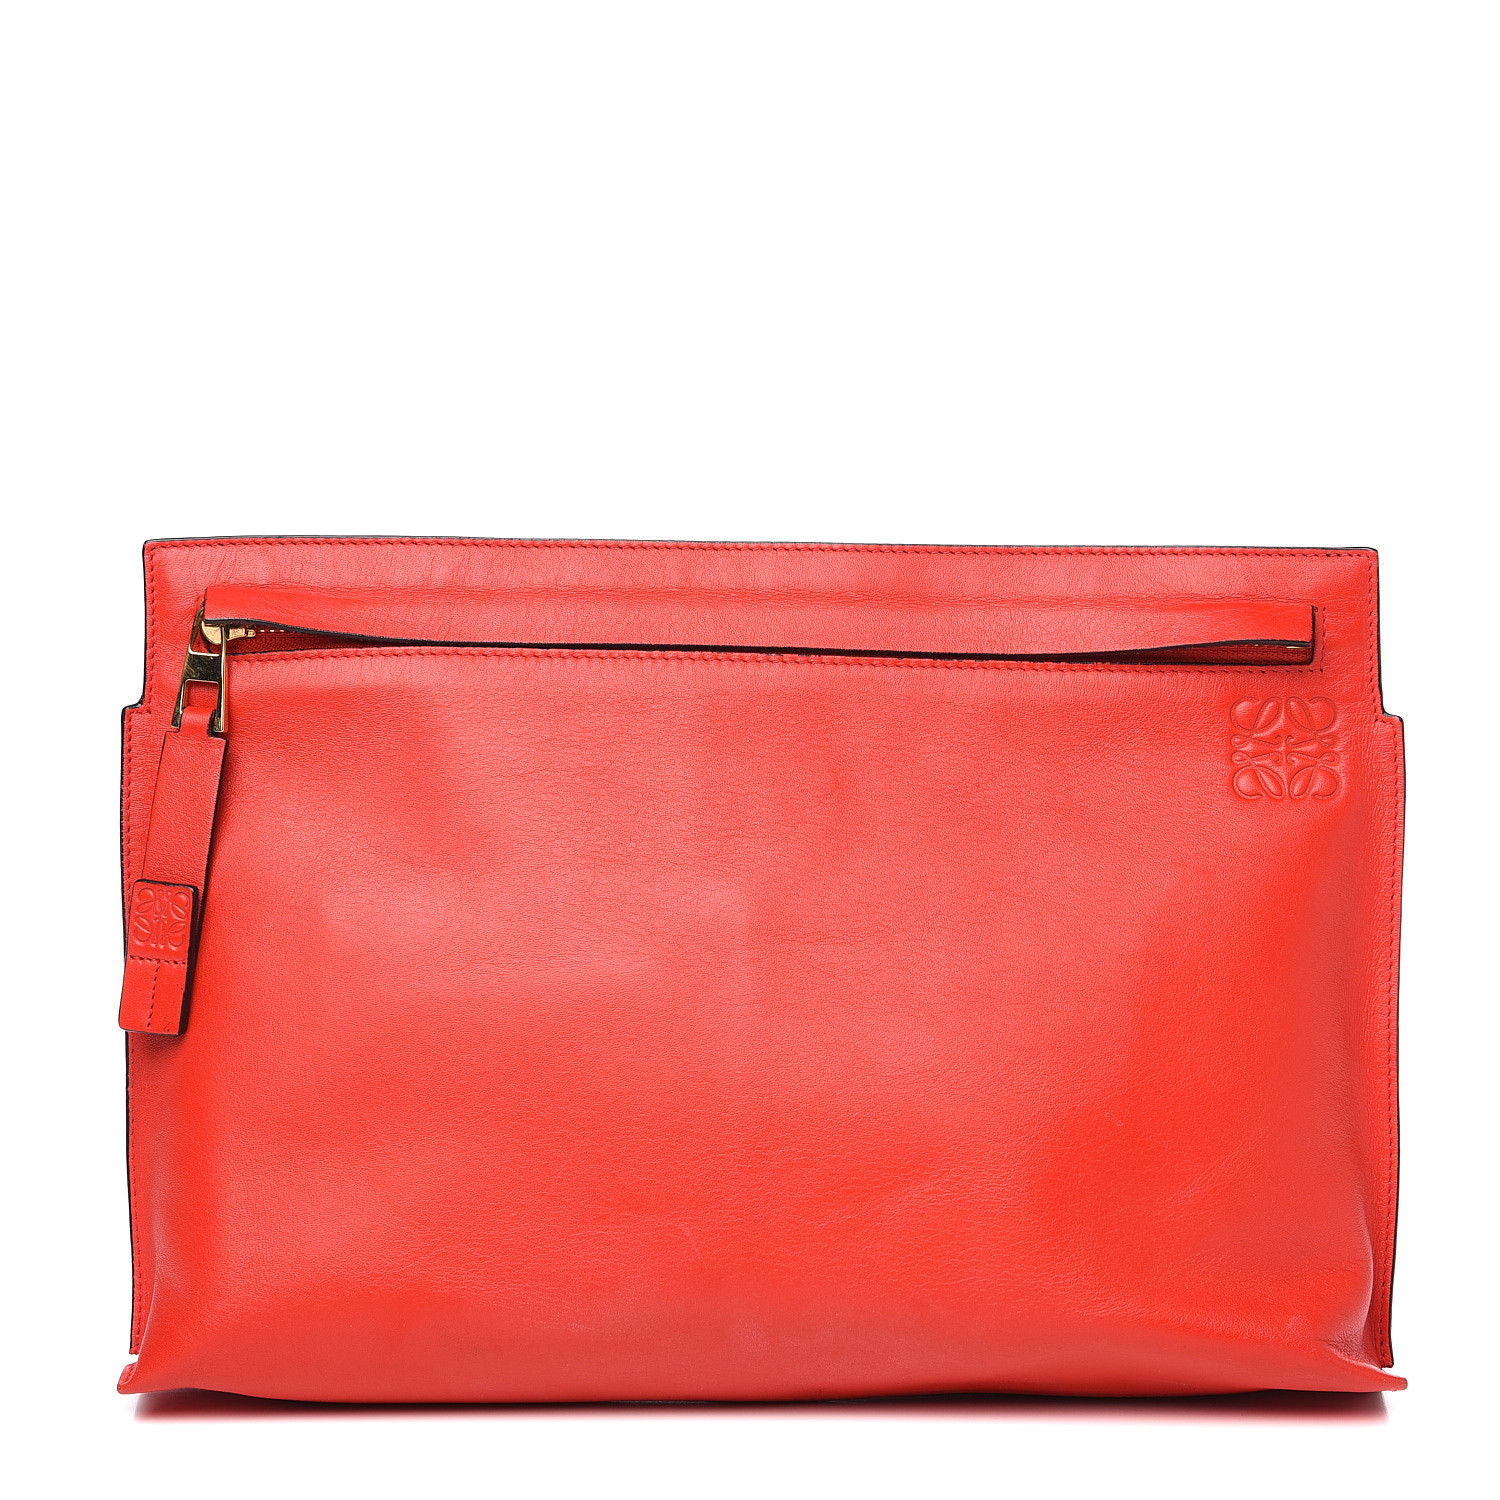 LOEWE Calfskin T Pouch Red 566998 